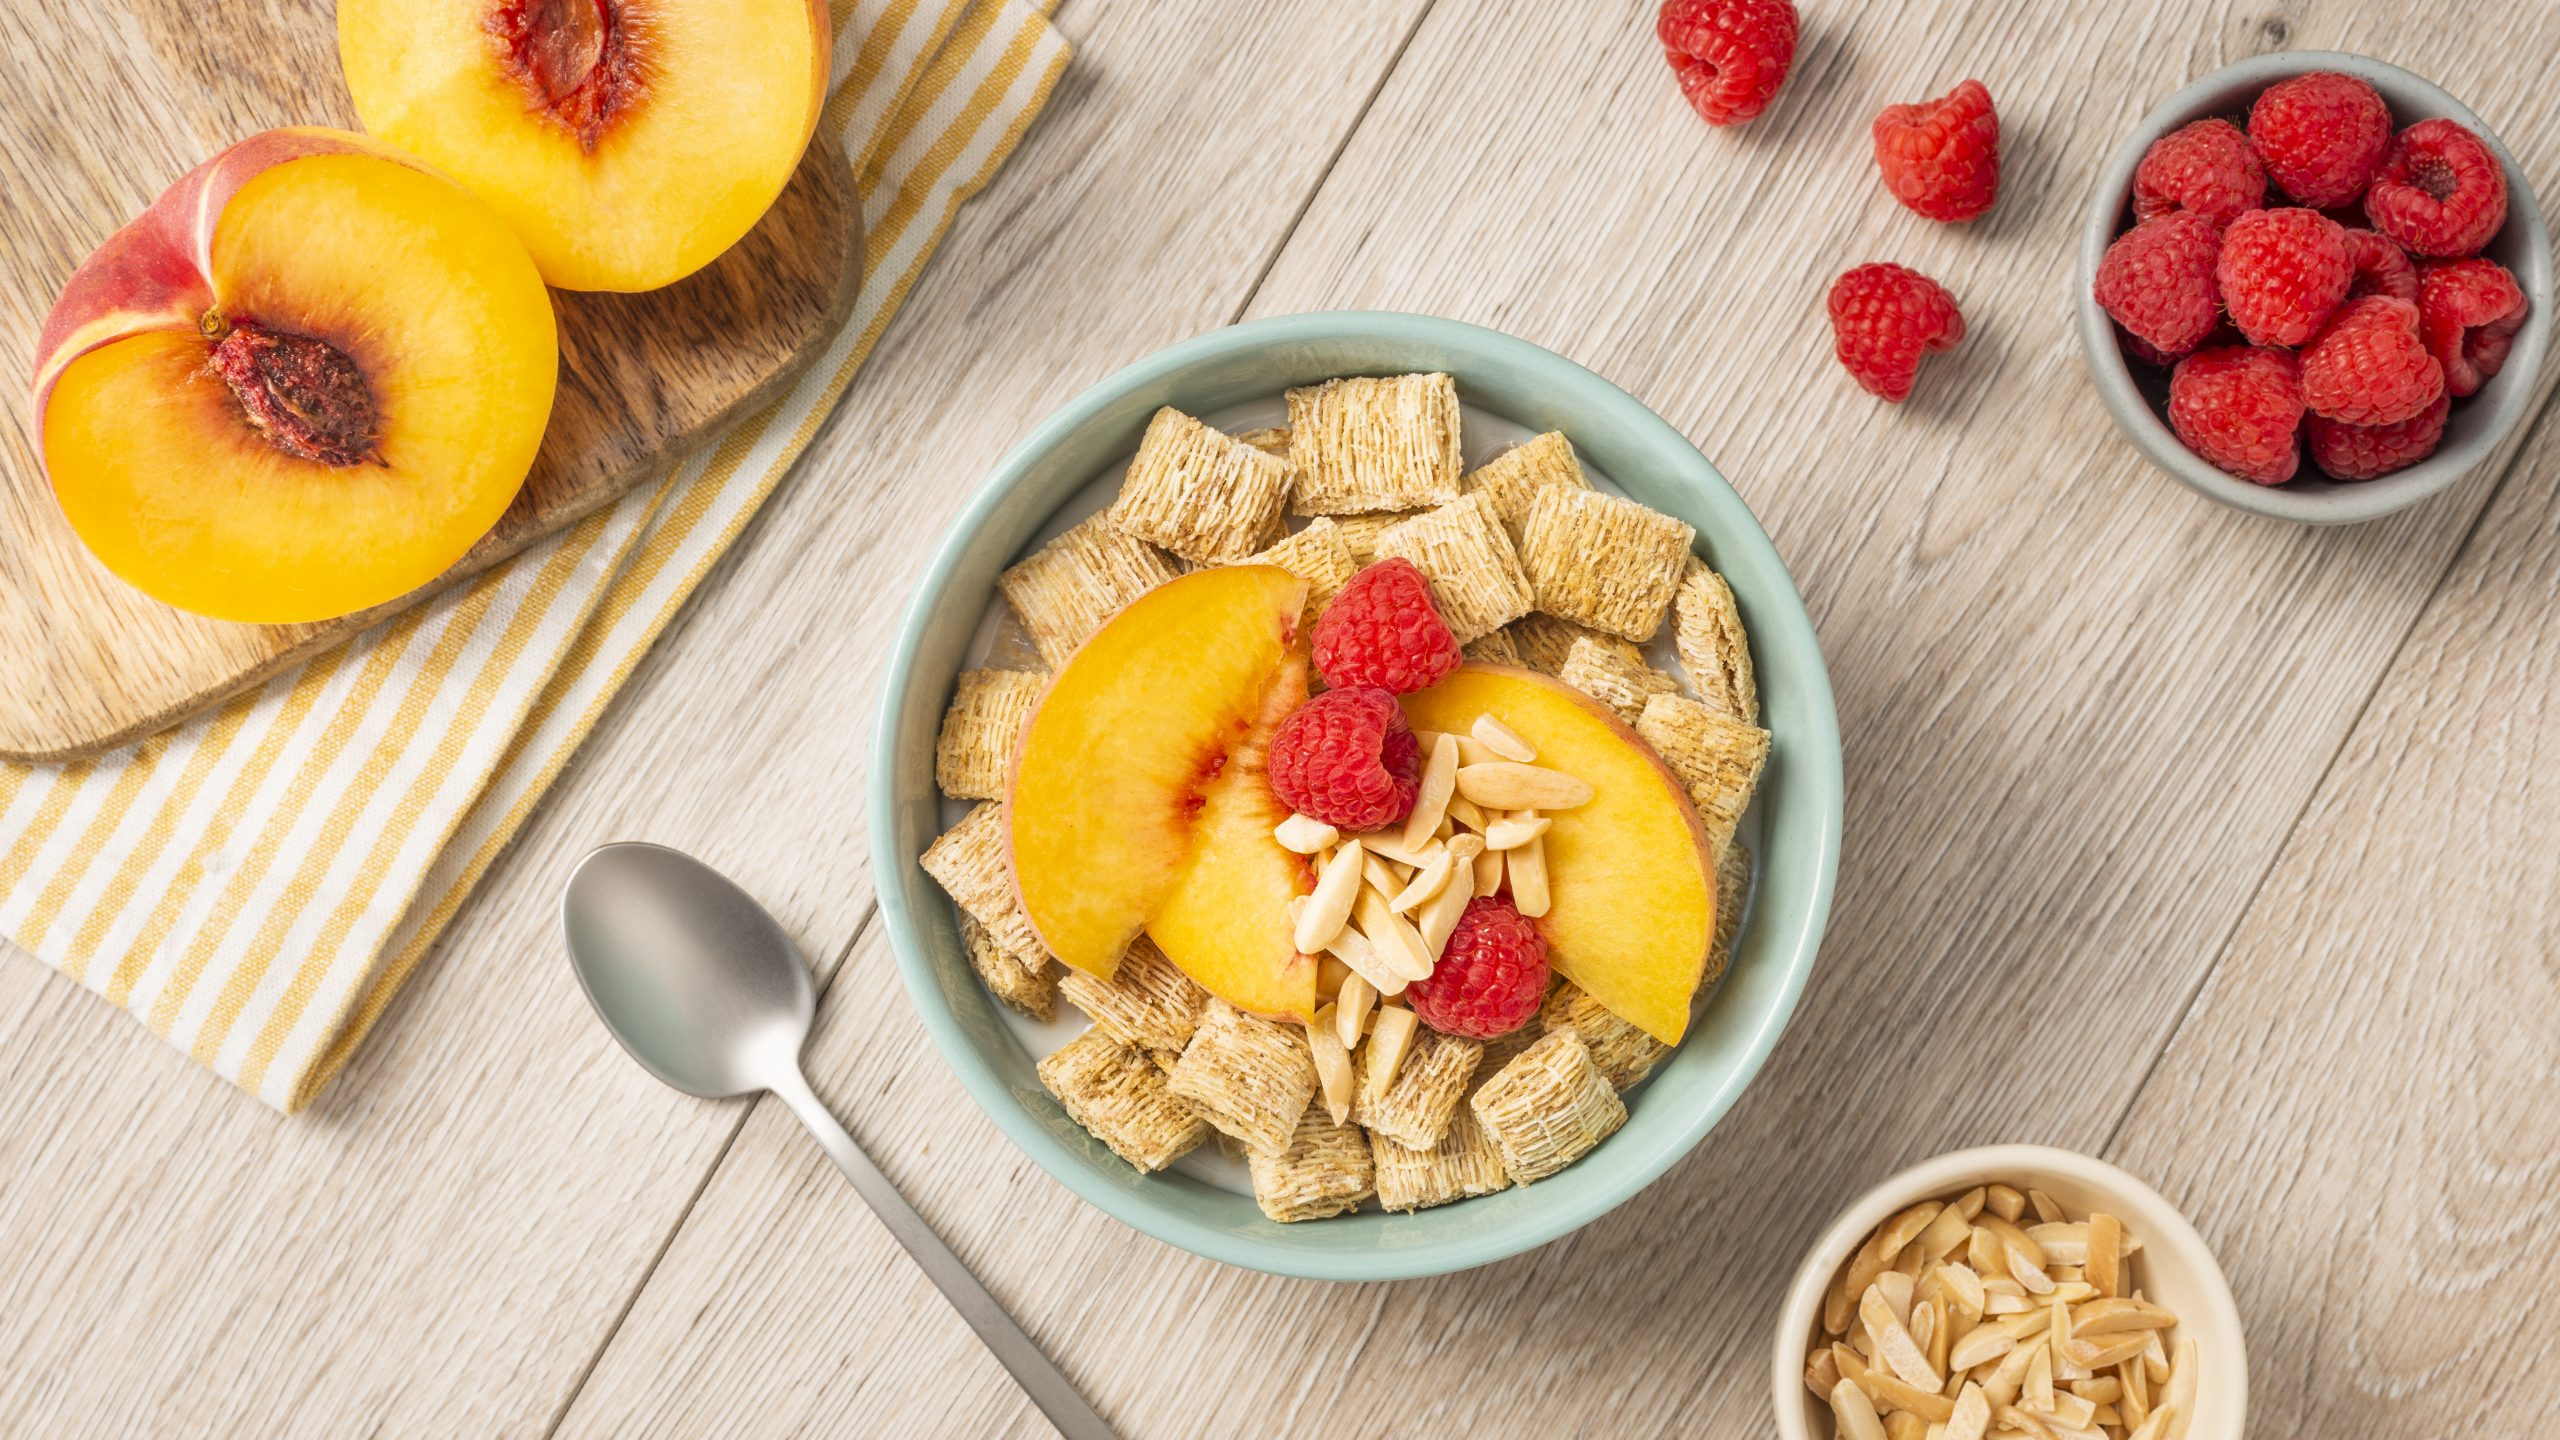 Shredded Wheat spoon size in a blue bowl with sliced peaches and raspberries on top.